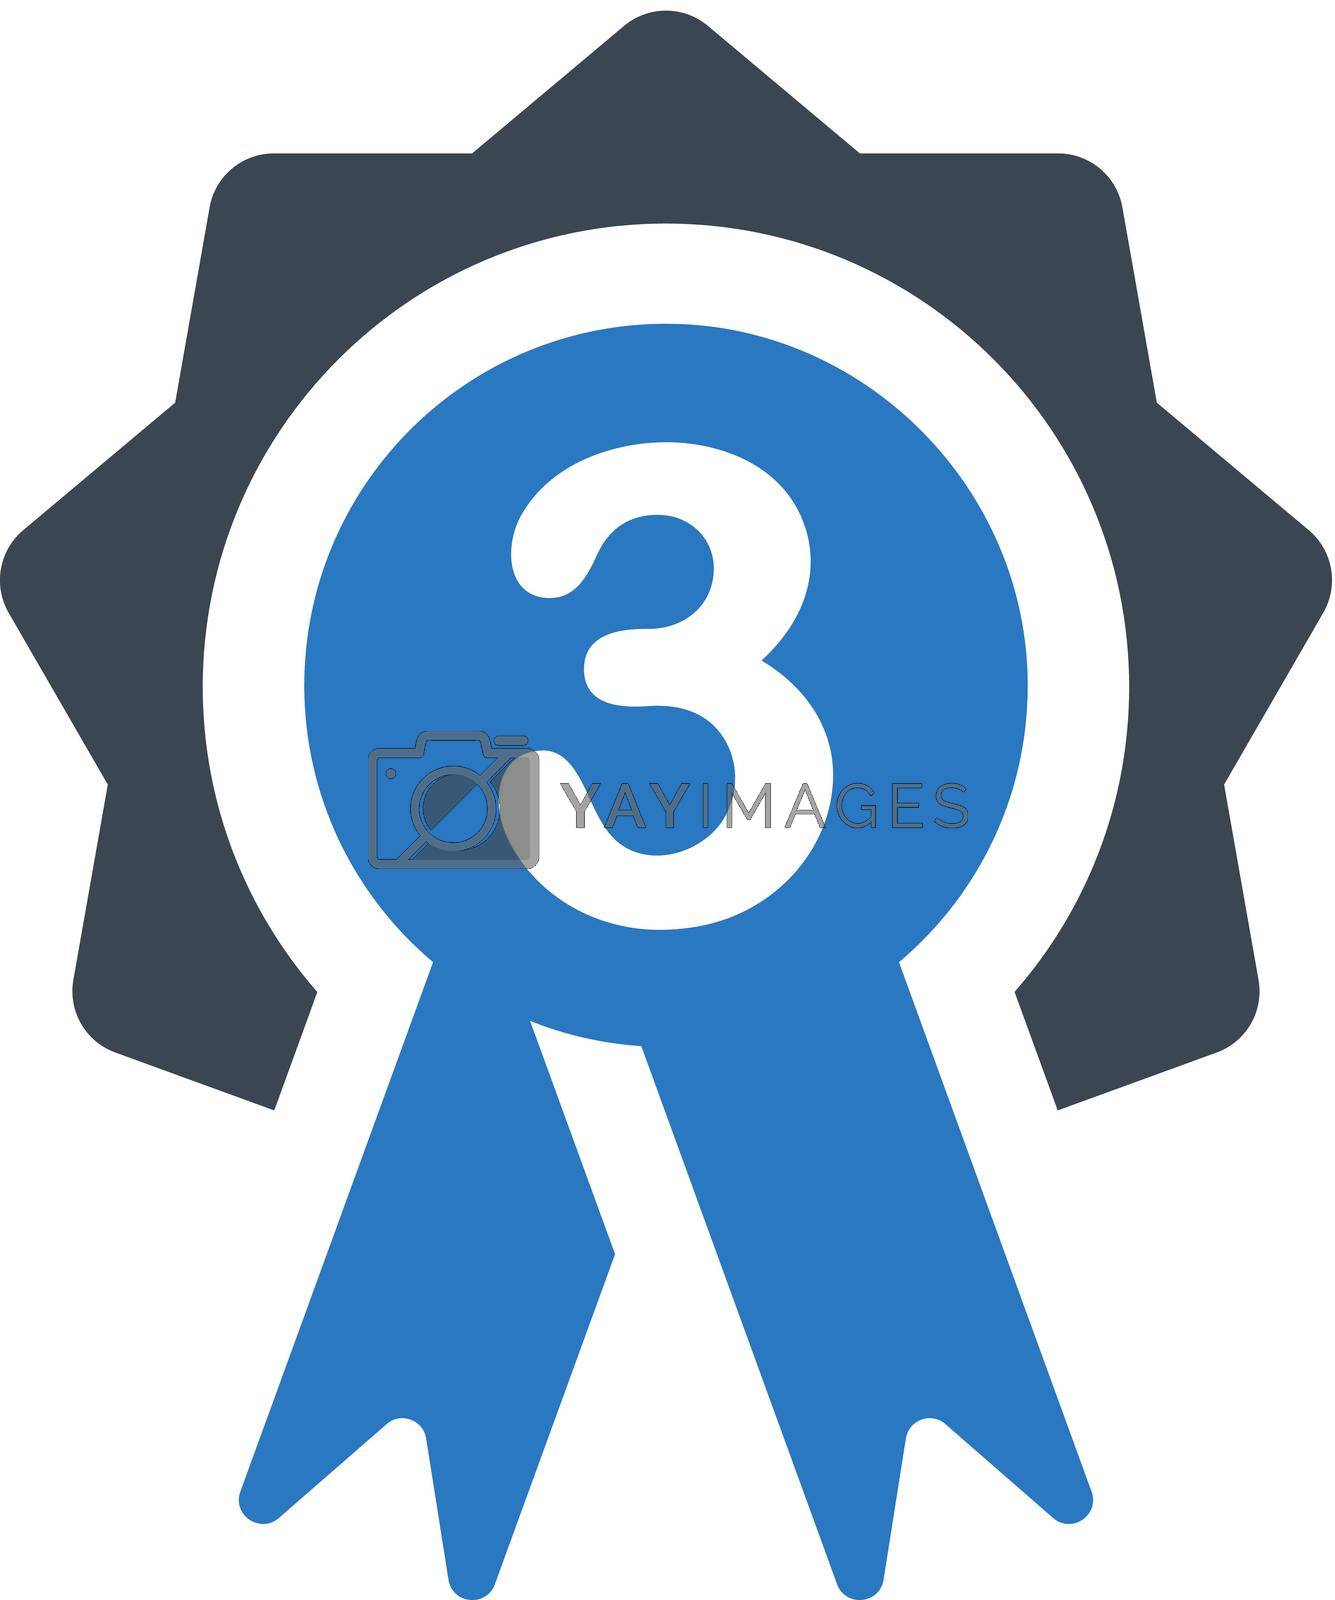 Royalty free image of Third place badge icon by delwar018